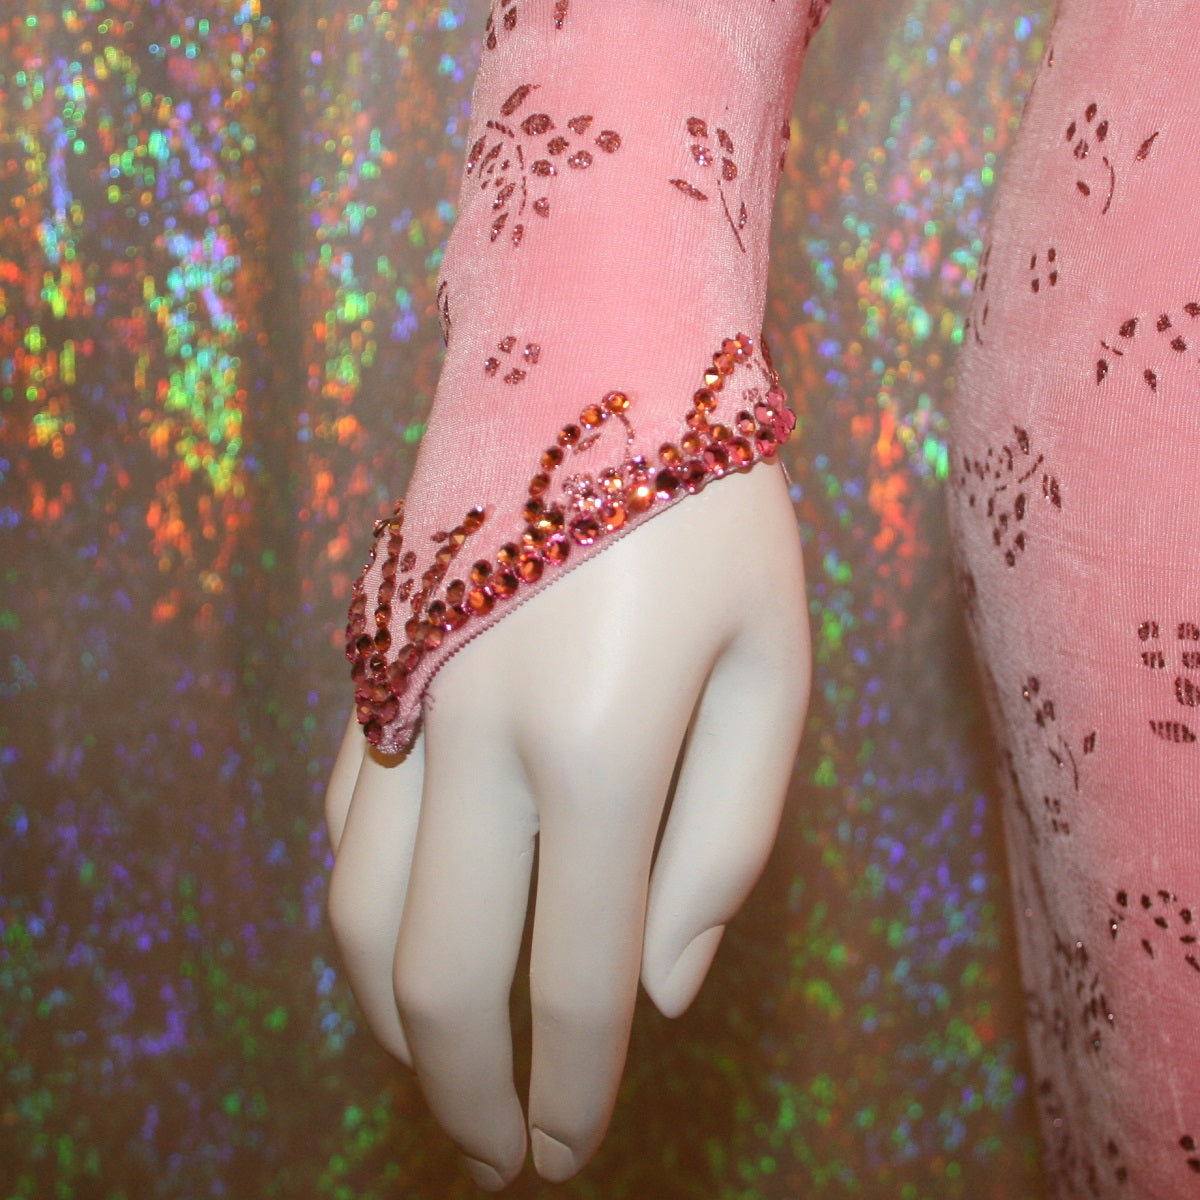 view of wrist detail on Delicate pink Latin-rhythm dress created of light pink glitter slinky with a delicate glitter flower pattern has sleek & classic lines, long sleeve on the right side with open lattice work detailing on the left side, embellished with Swarovski rhinestone work & hand beading